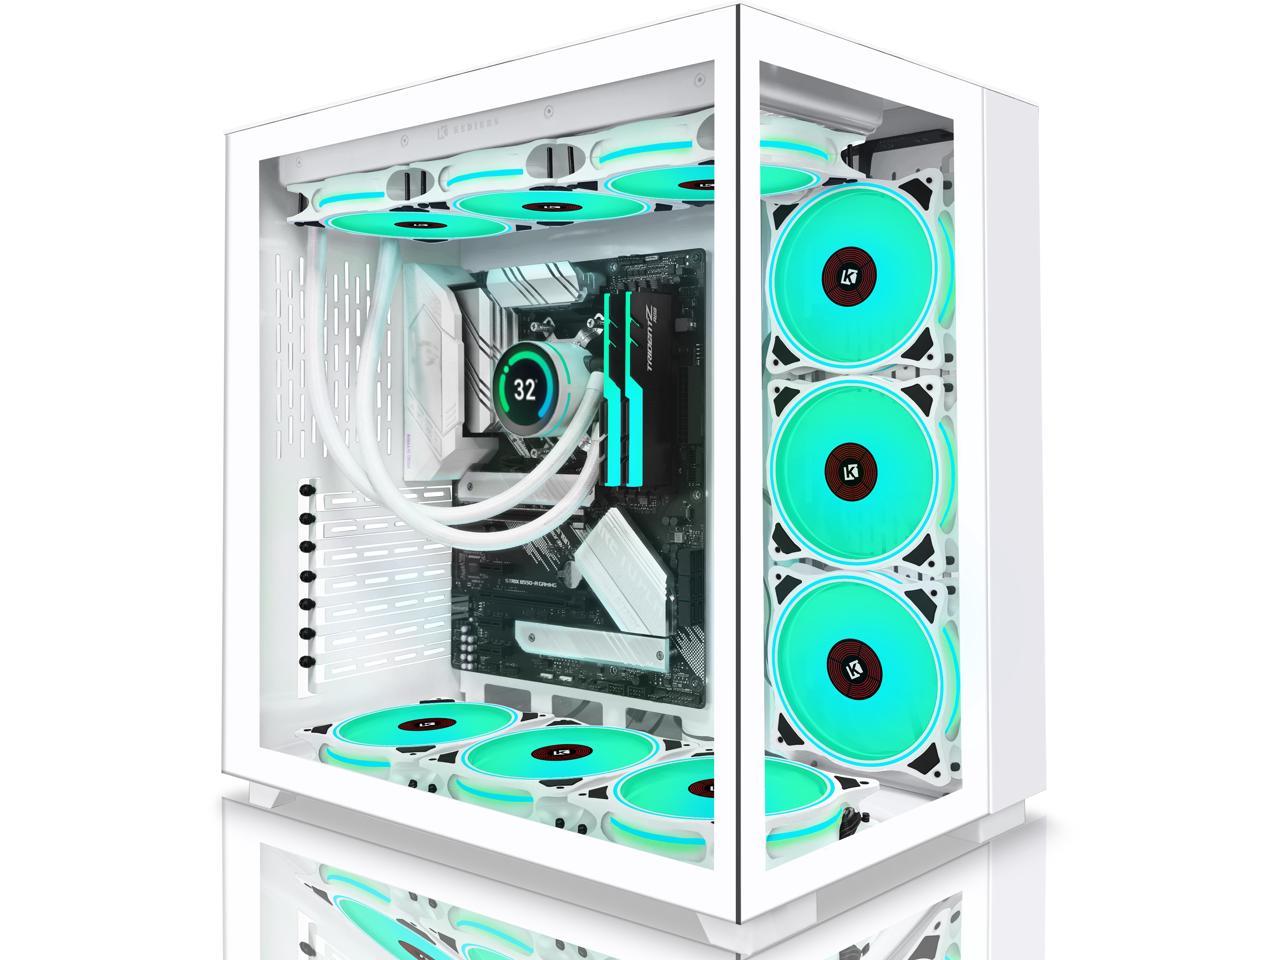 KEDIERS PC CASE ATX Mid Tower Case Tempered Glass Gaming Computer Case ...